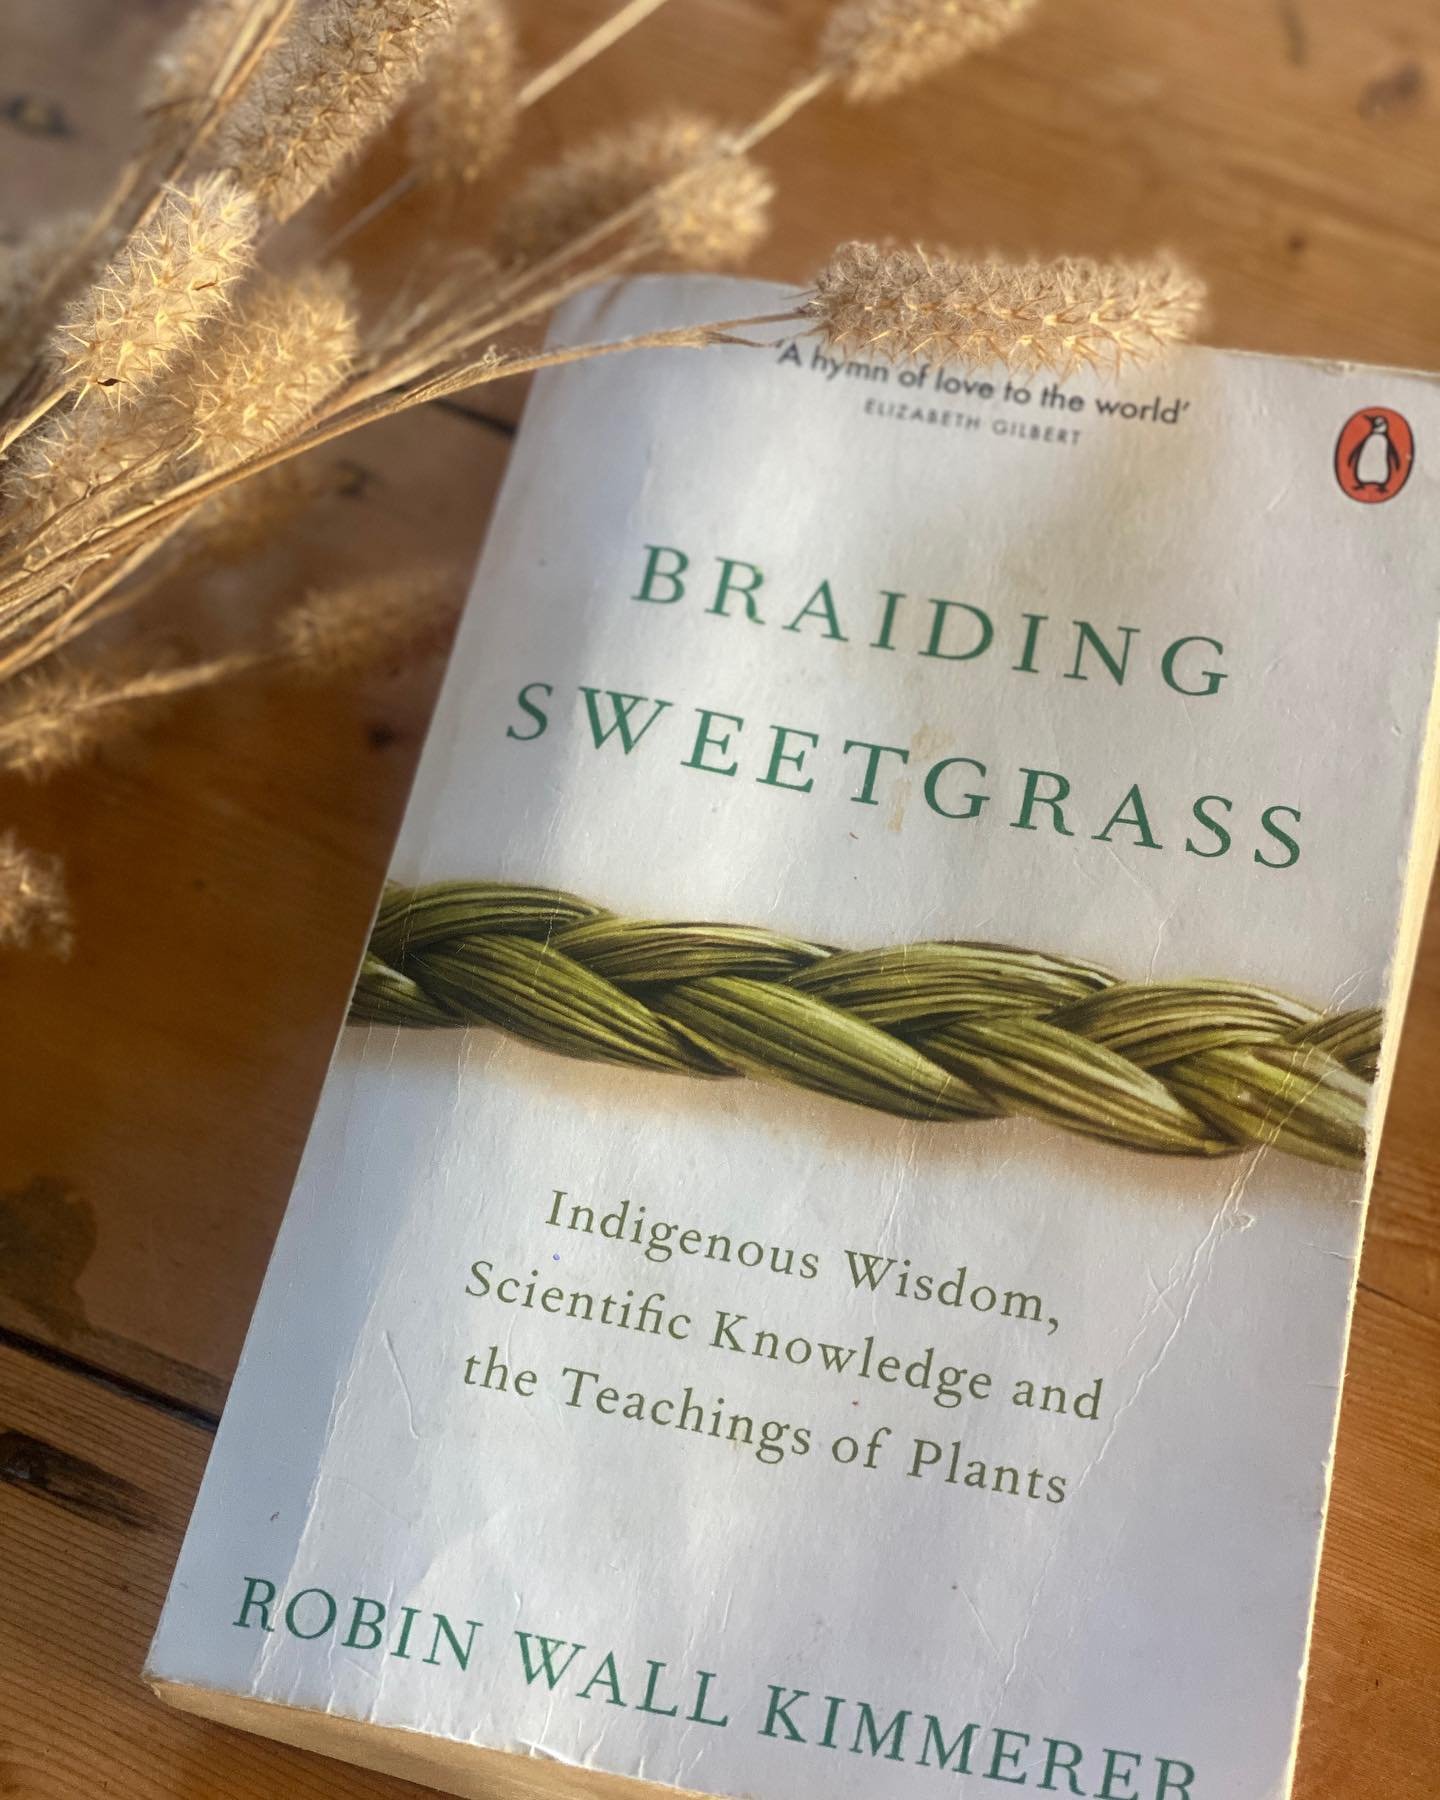 EARTH DAY EARTH YEAR EARTH LIFE

🌿🌊🍂

These celebrations or ceremony help us to remember what to remember as Robin Wall Kimmerer talks about in her book Braiding Sweetgrass.

I wonder what the world would be like if everyone, or even 10-20% of the